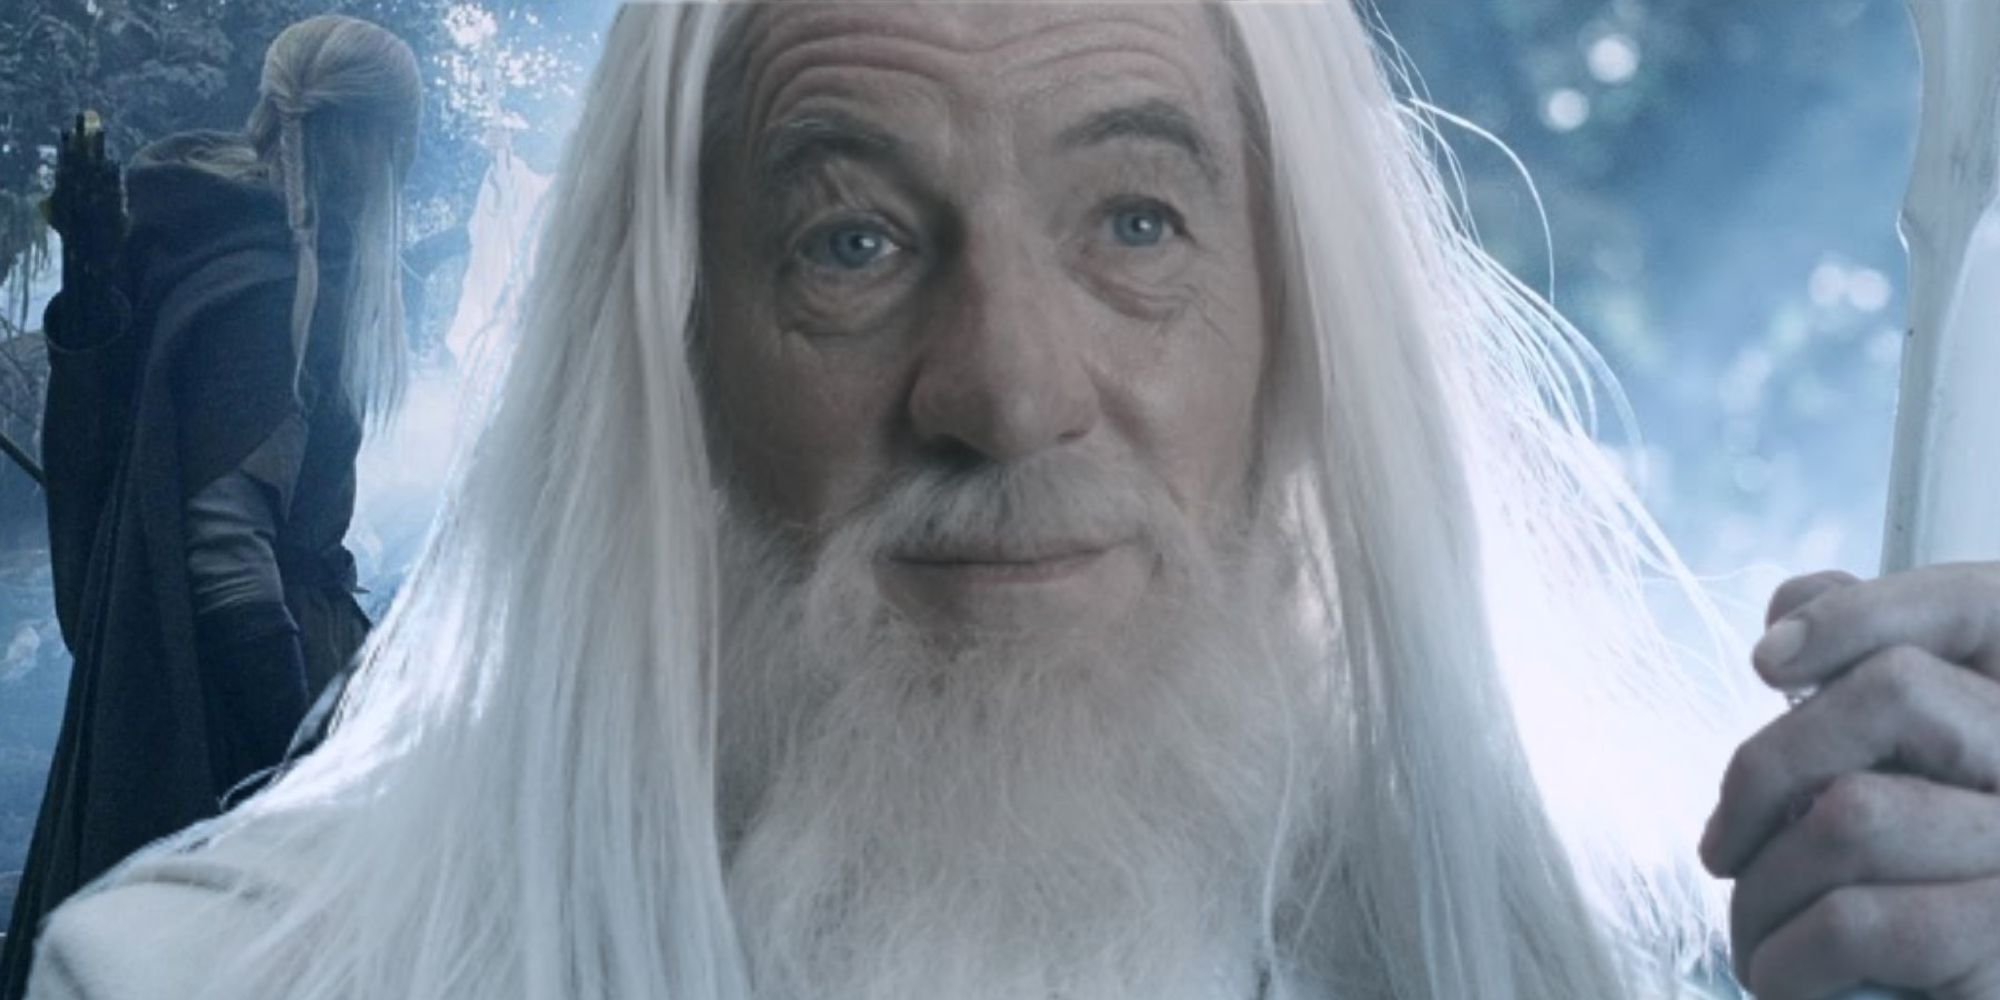 Gandalf reappears to Legolas, Aragorn, and Gimli as Gandalf the White